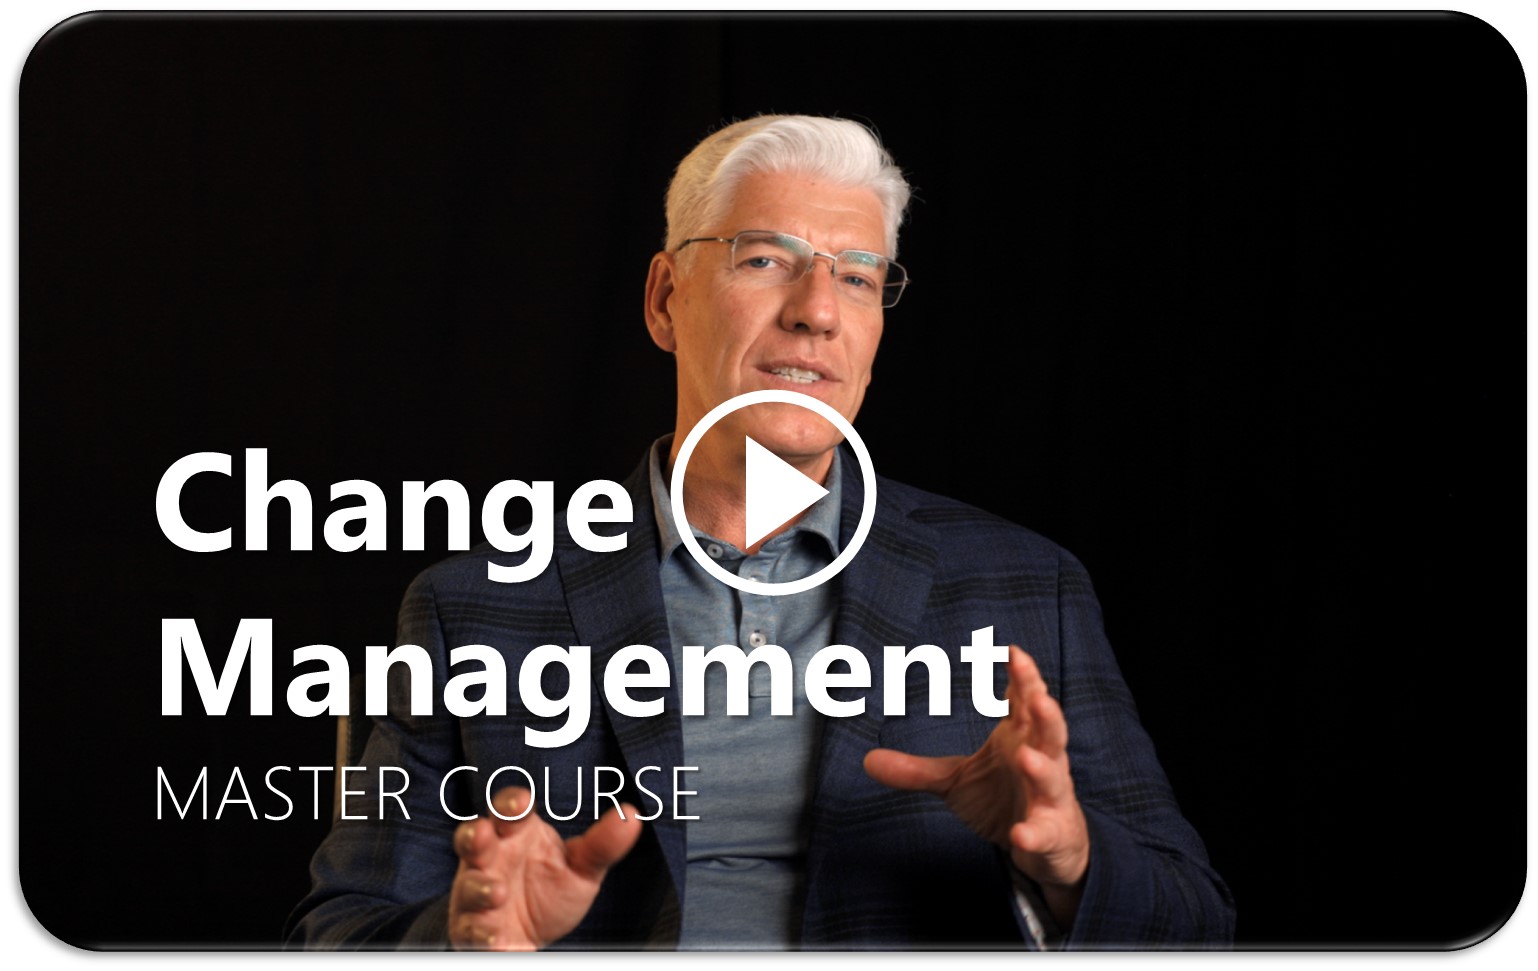 Change Management Master Course Preview